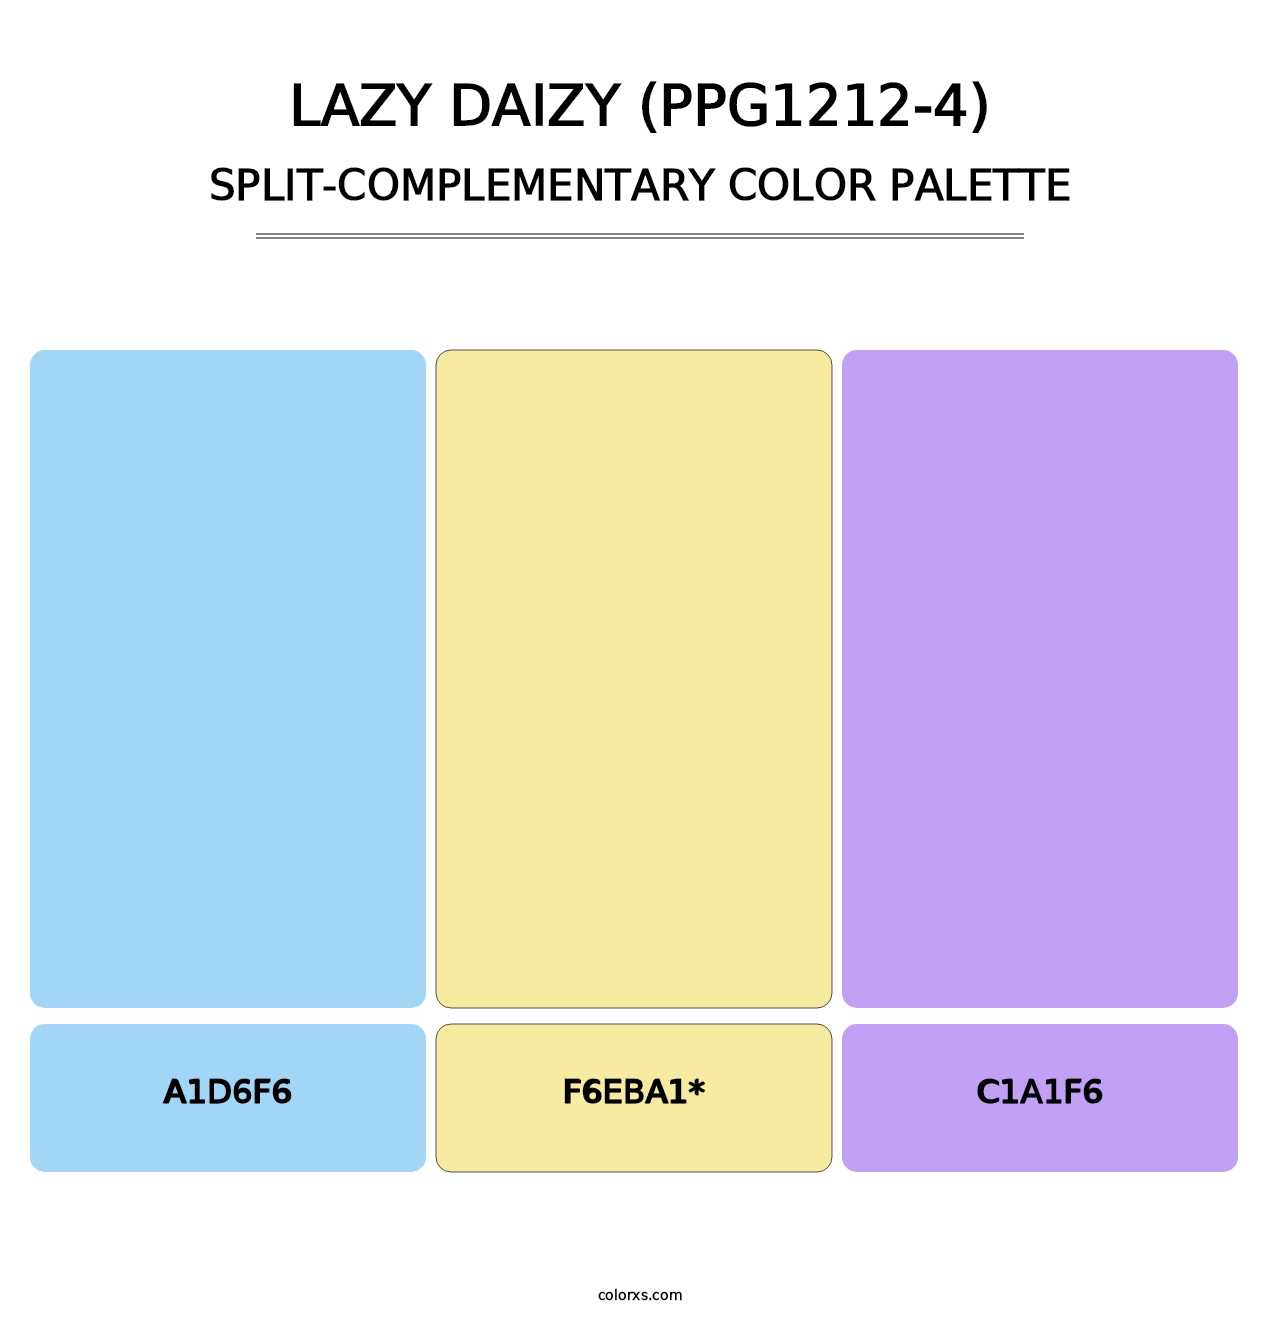 Lazy Daizy (PPG1212-4) - Split-Complementary Color Palette